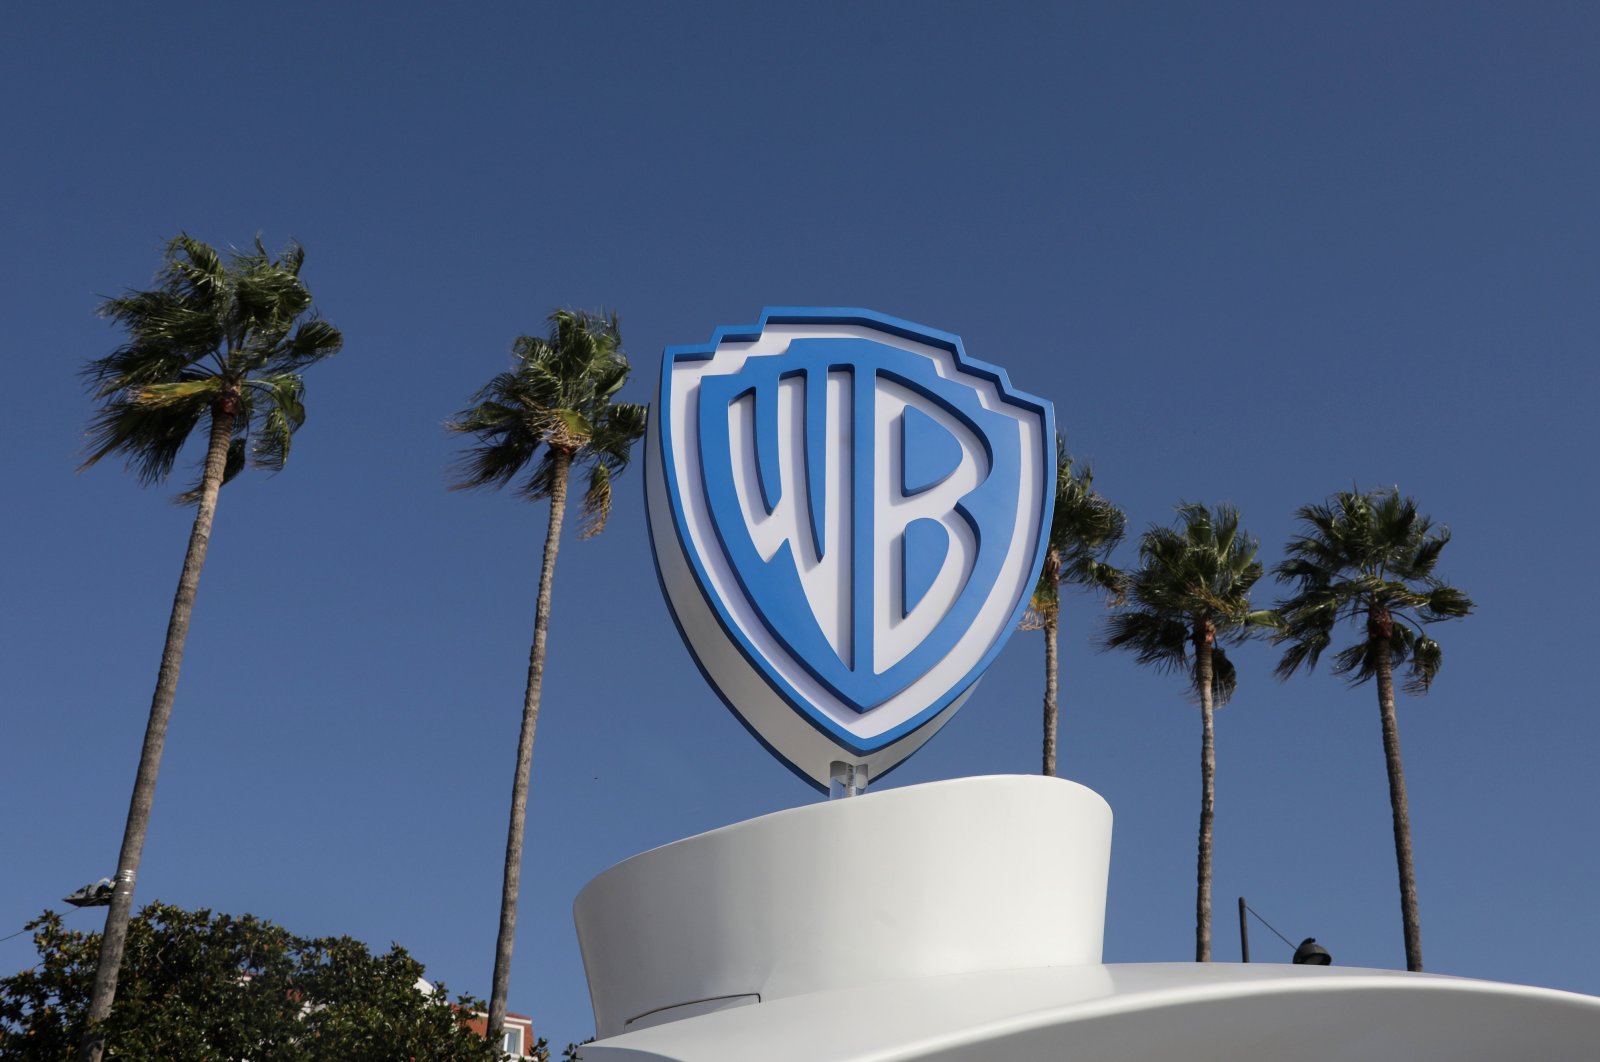 The Warner Bros logo is seen during the annual MIPCOM television program market in Cannes, France, Oct. 14, 2019. (Reuters Photo)